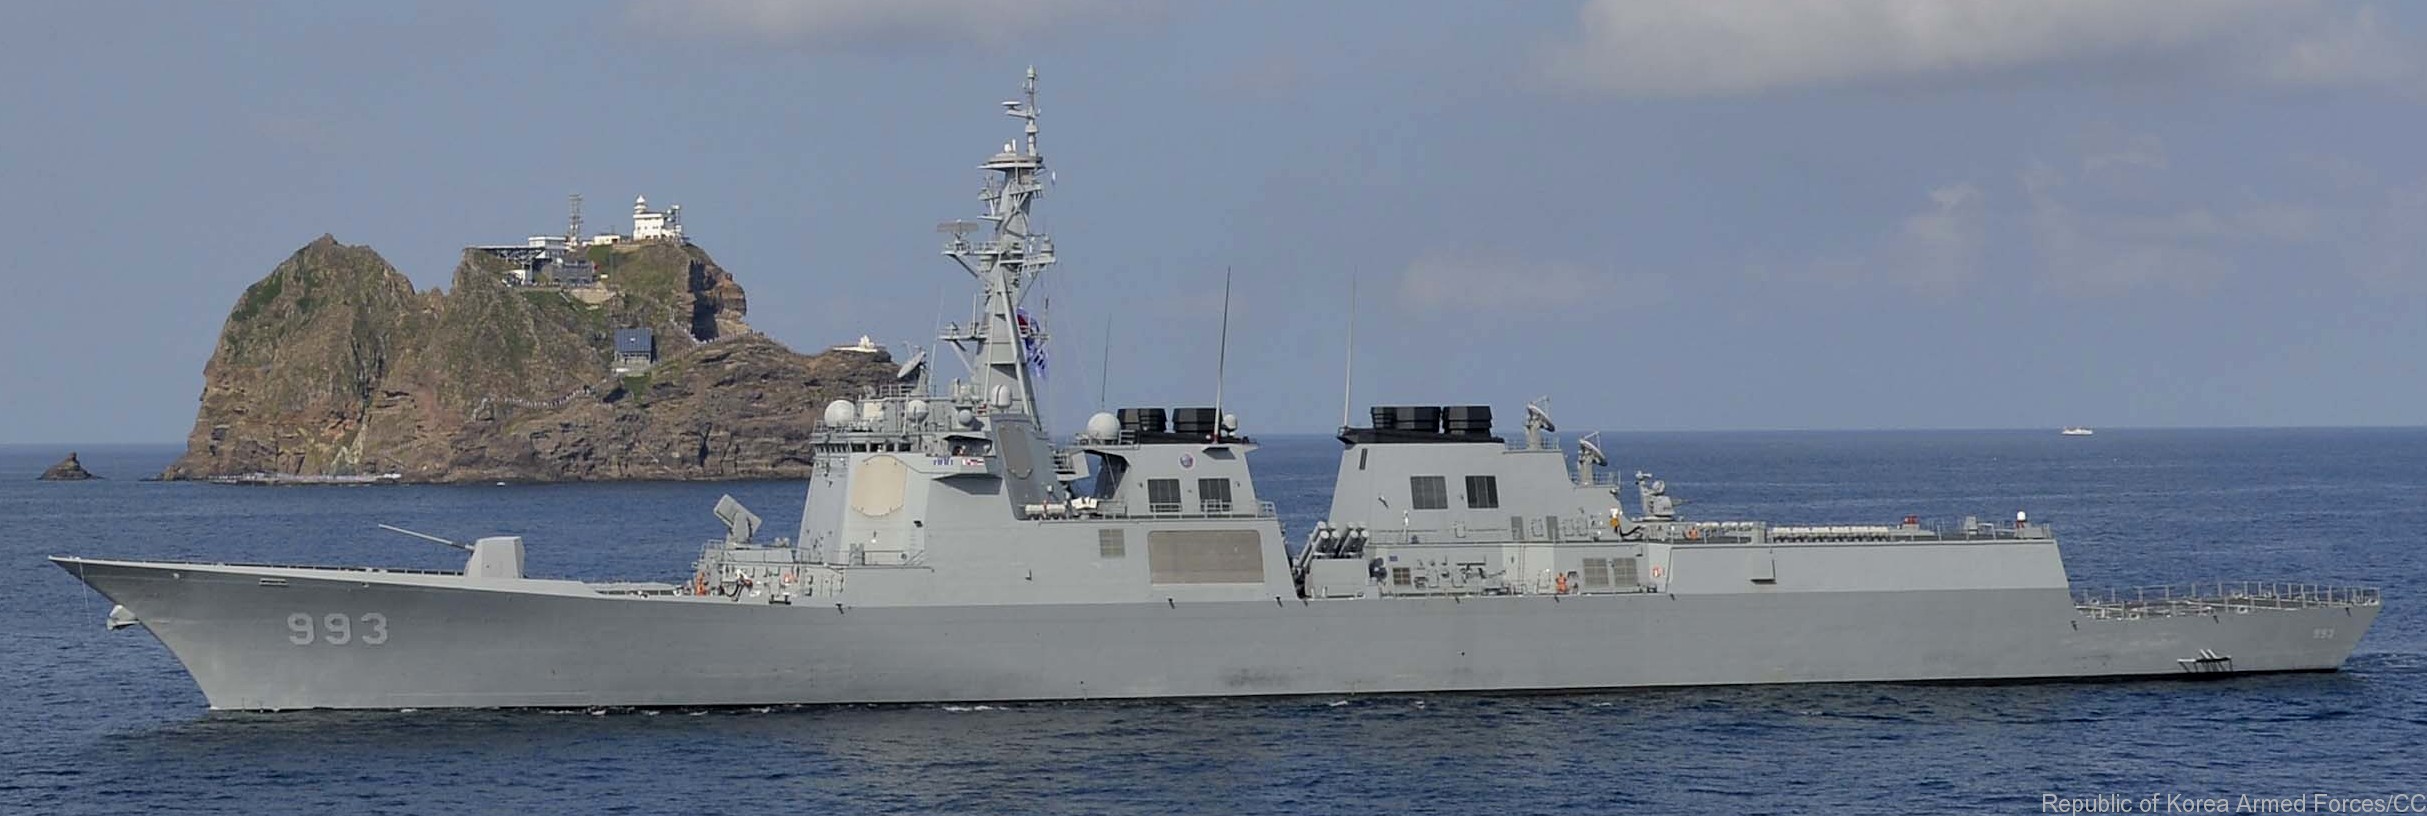 ddg-993 roks seoae ryu seong-ryong sejong the great class guided missile destroyer aegis republic of korea navy rokn 26